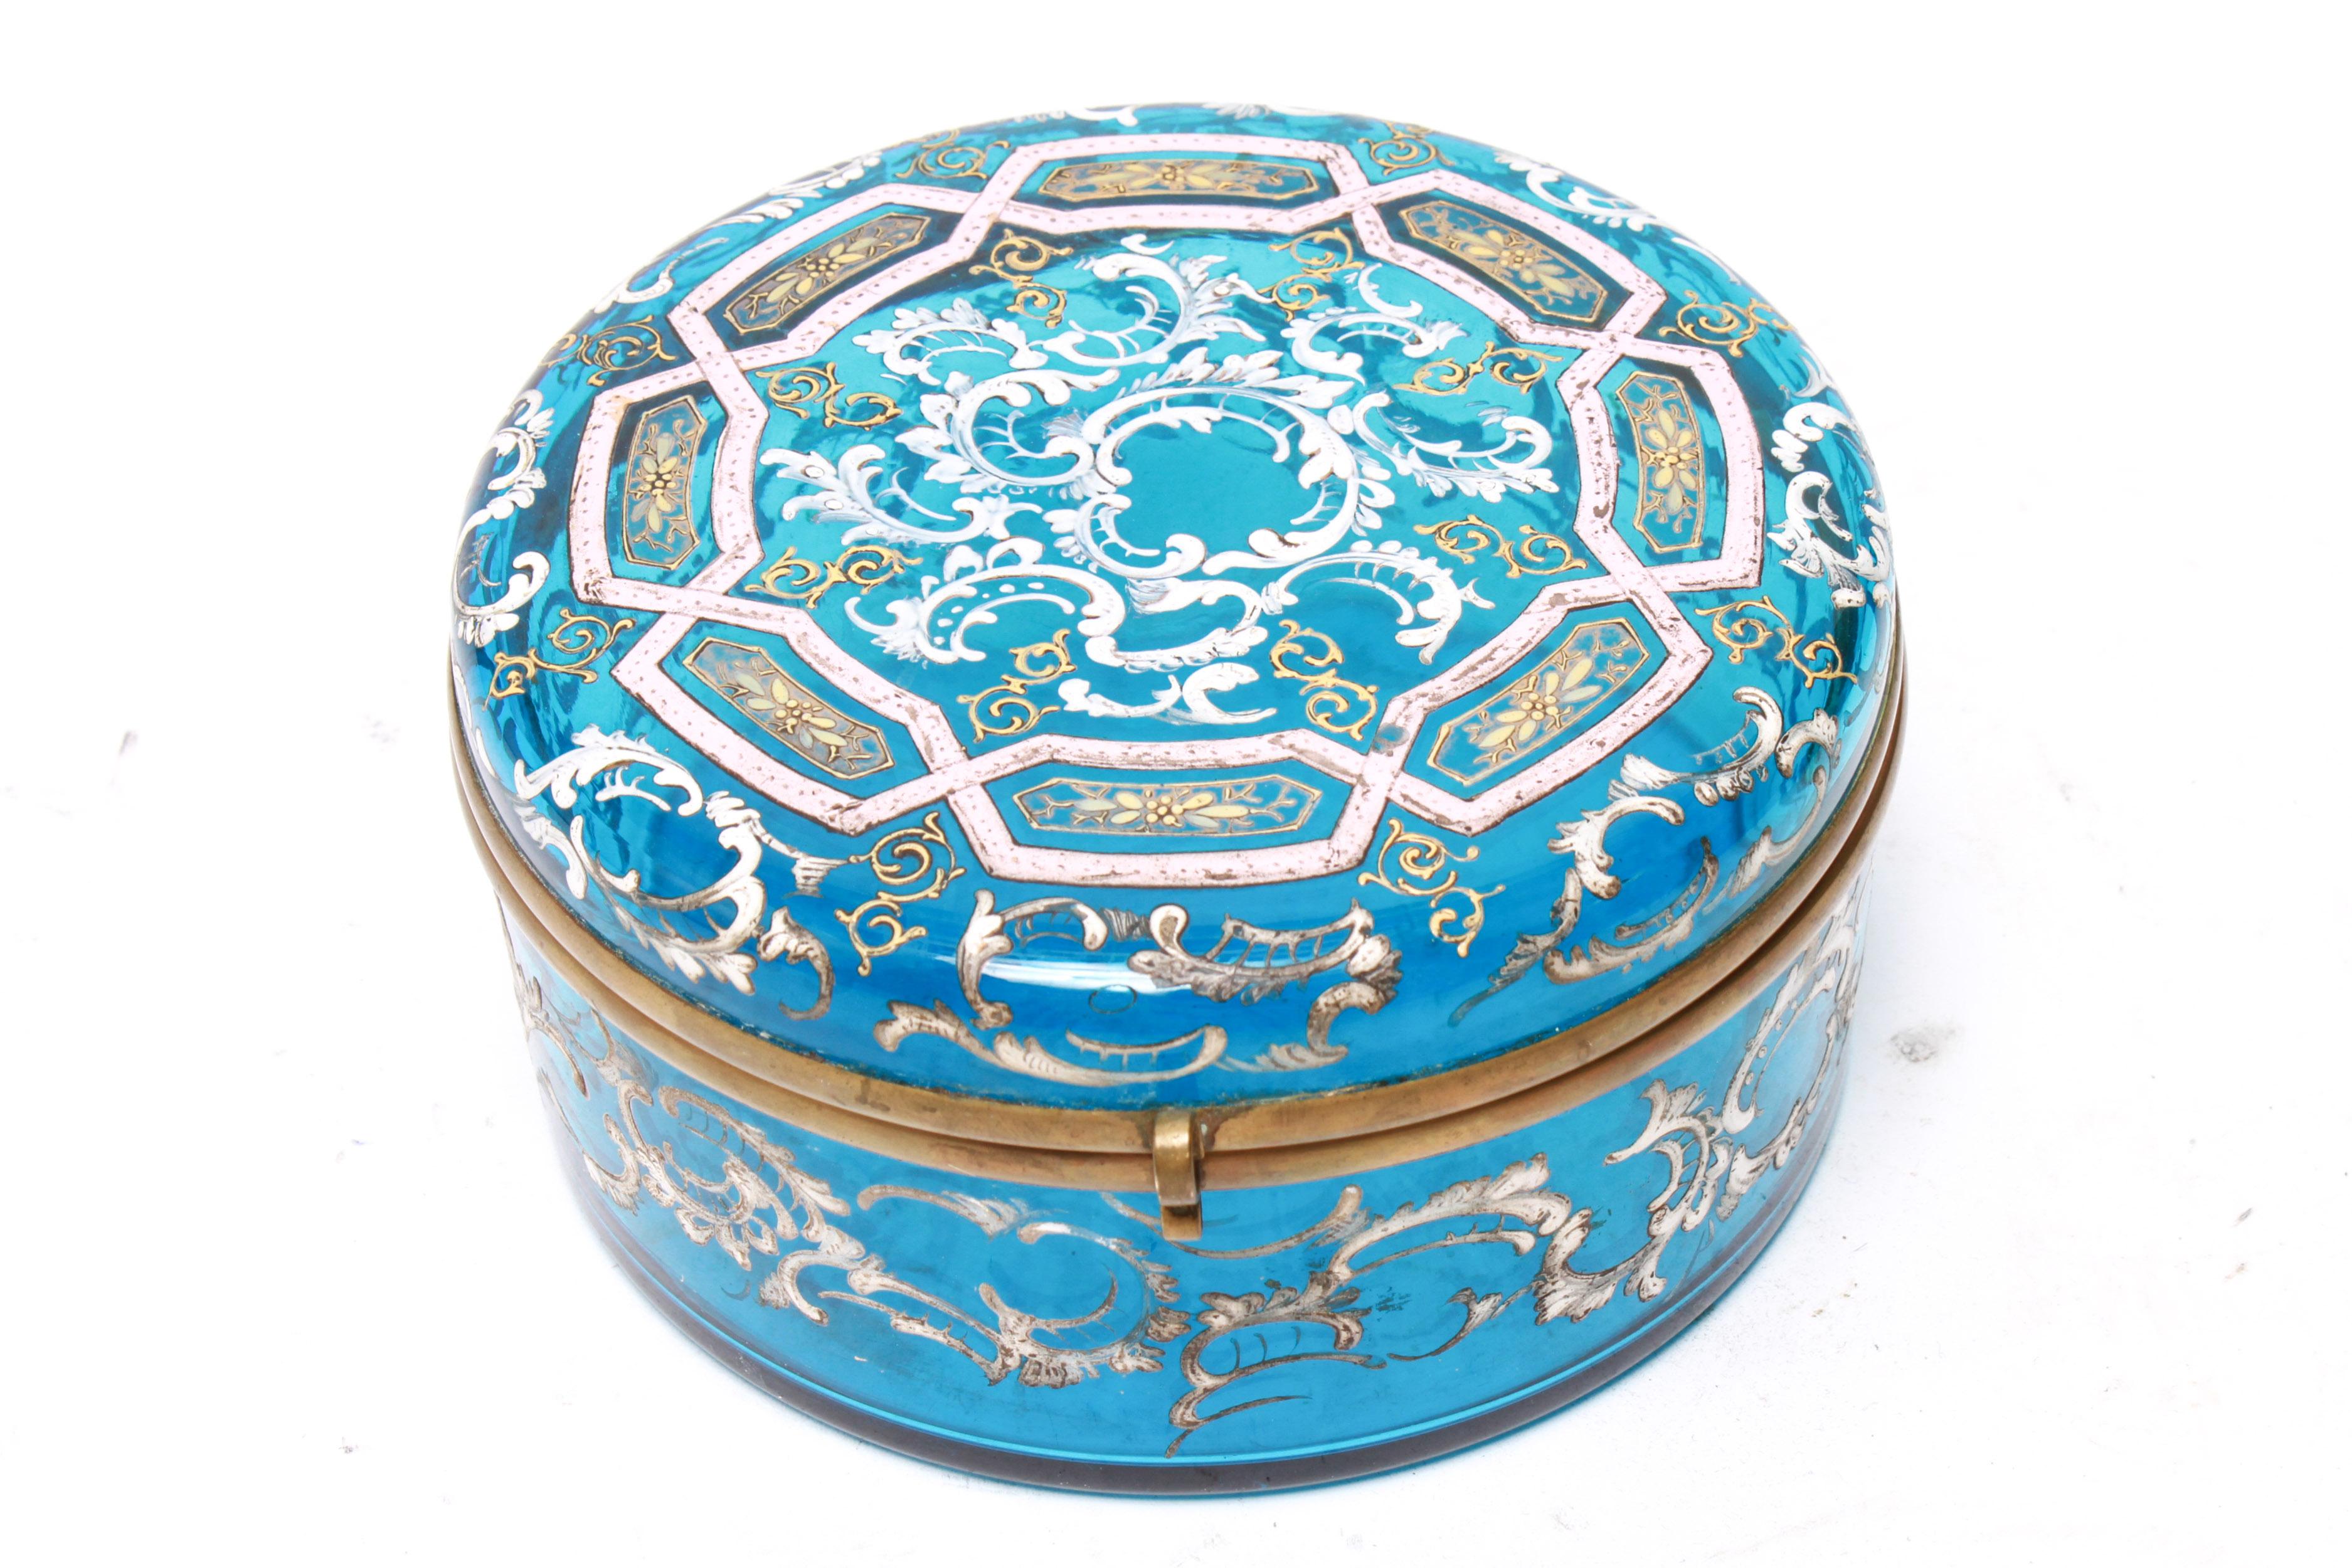 Moser style Bohemian large lidded vanity box in blue glass with enamel decoration and with brass hardware. The piece is in great vintage condition with age-appropriate wear.